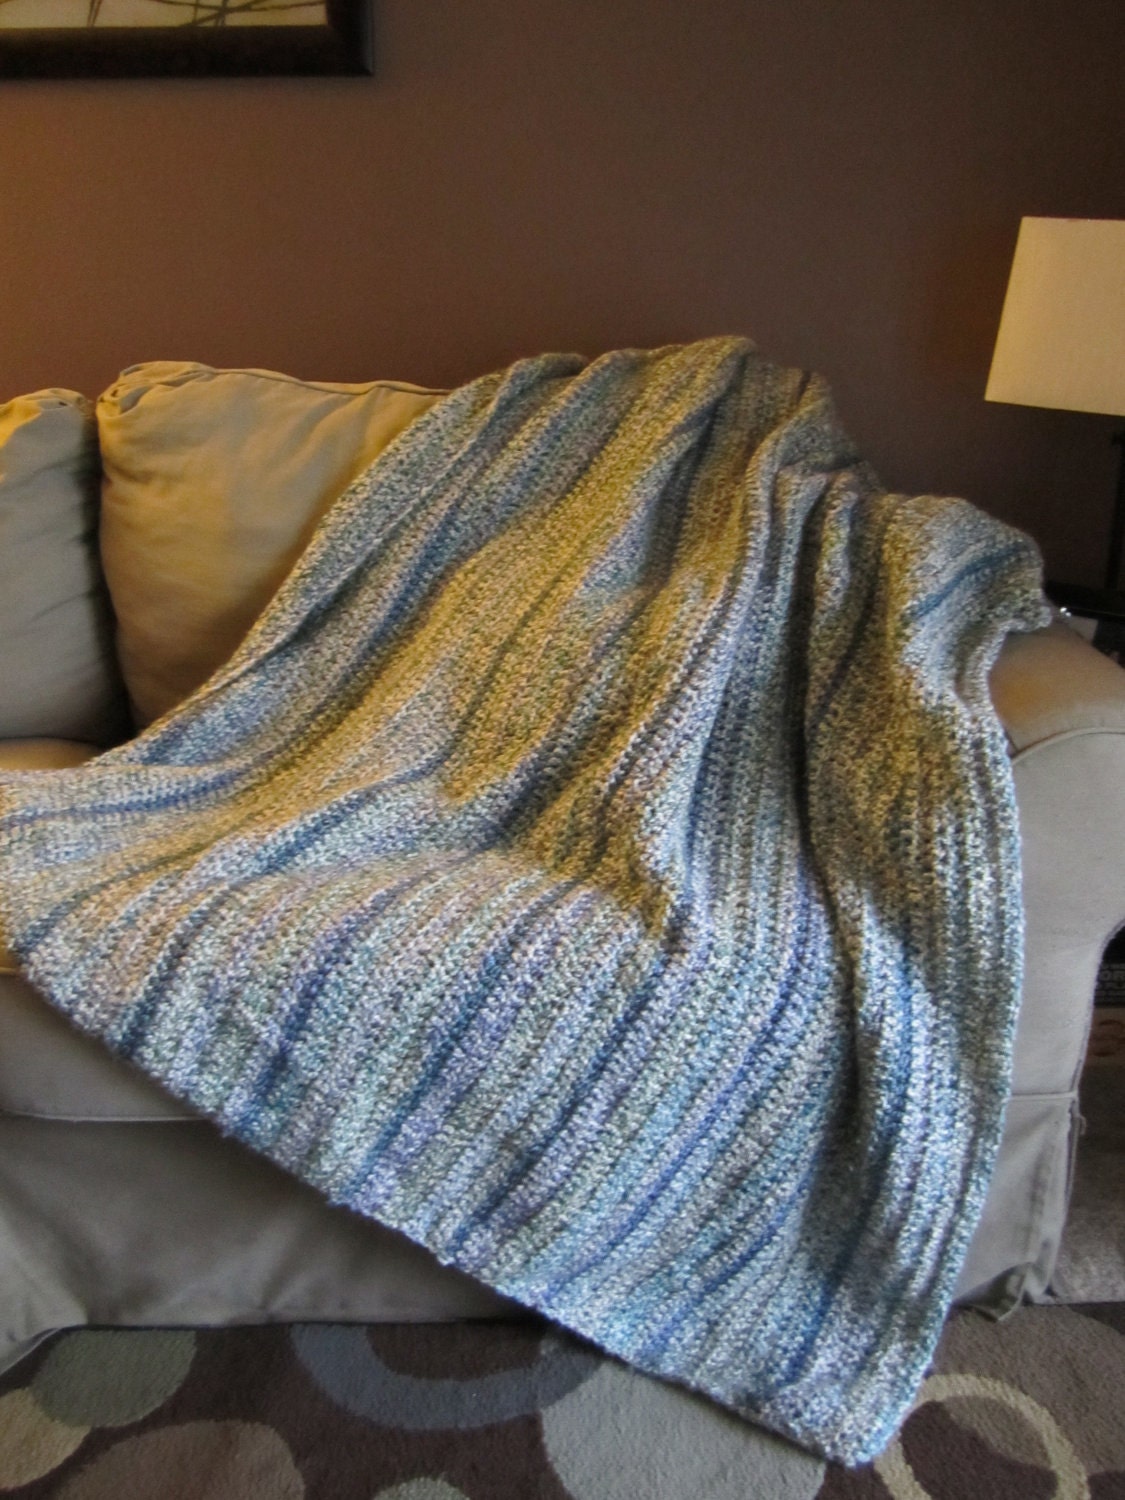 Fuzzy warm blue striped blanket Extra large-PRICE REDUCED